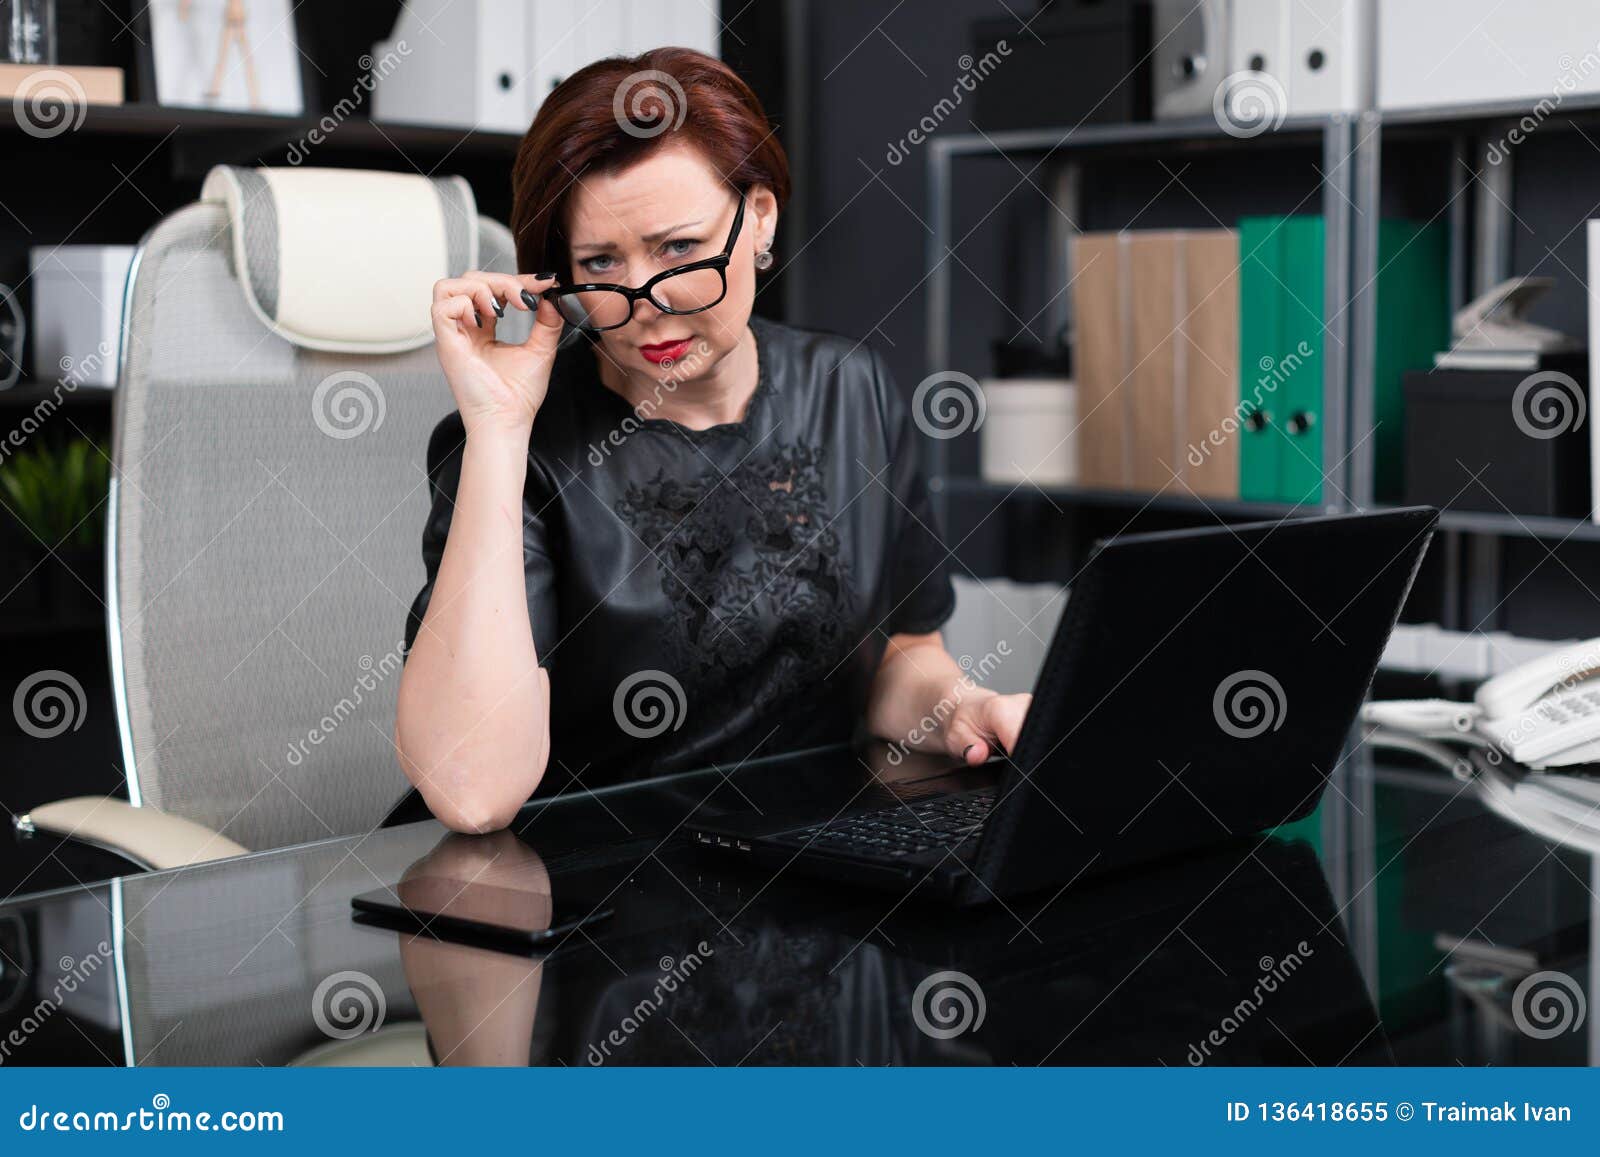 Stylish Woman Lifted Her Glasses And Looks Right Sitting At Table In